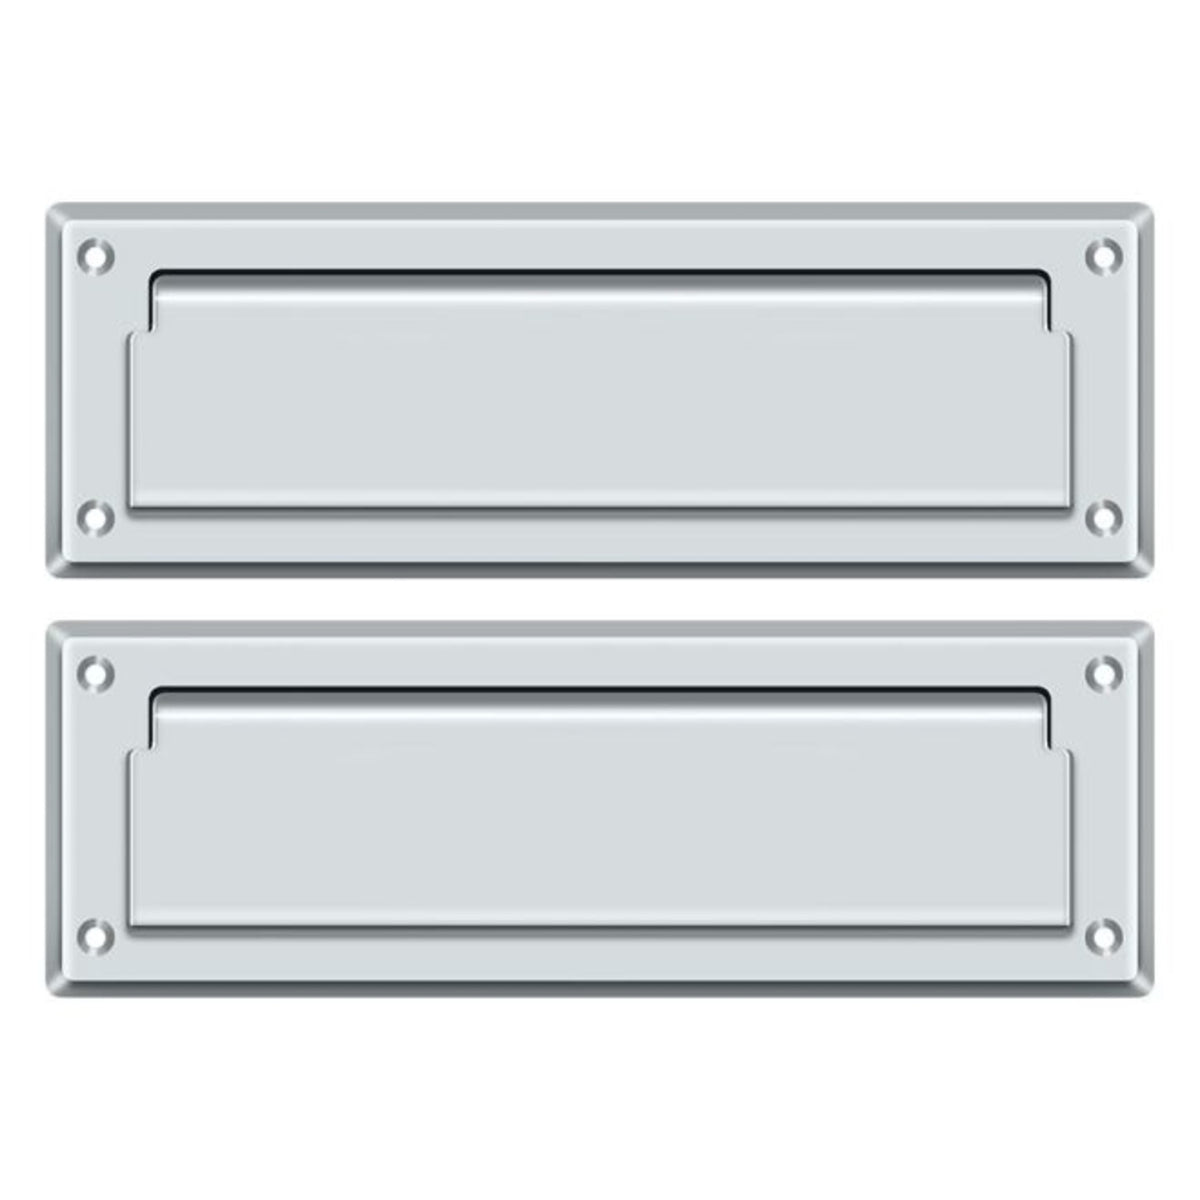 Deltana MS627U26 Mail Slot With Back Plate, Bright Chrome